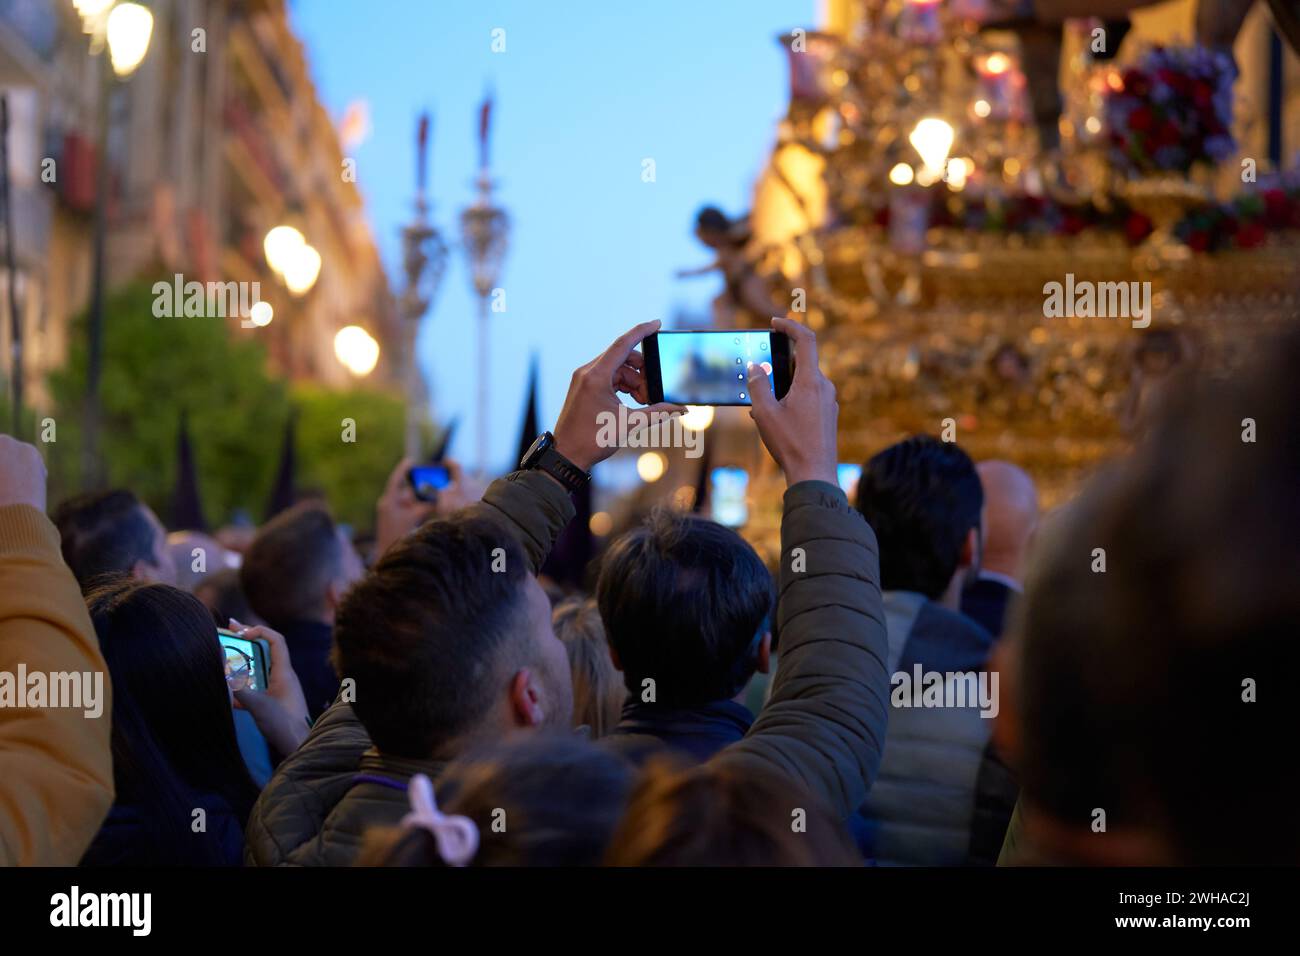 In the predawn hours of Maundy Thursday in Seville, Spain, devout worshipers gather along the streets to witness the solemn beauty of the Holy Week pr Stock Photo